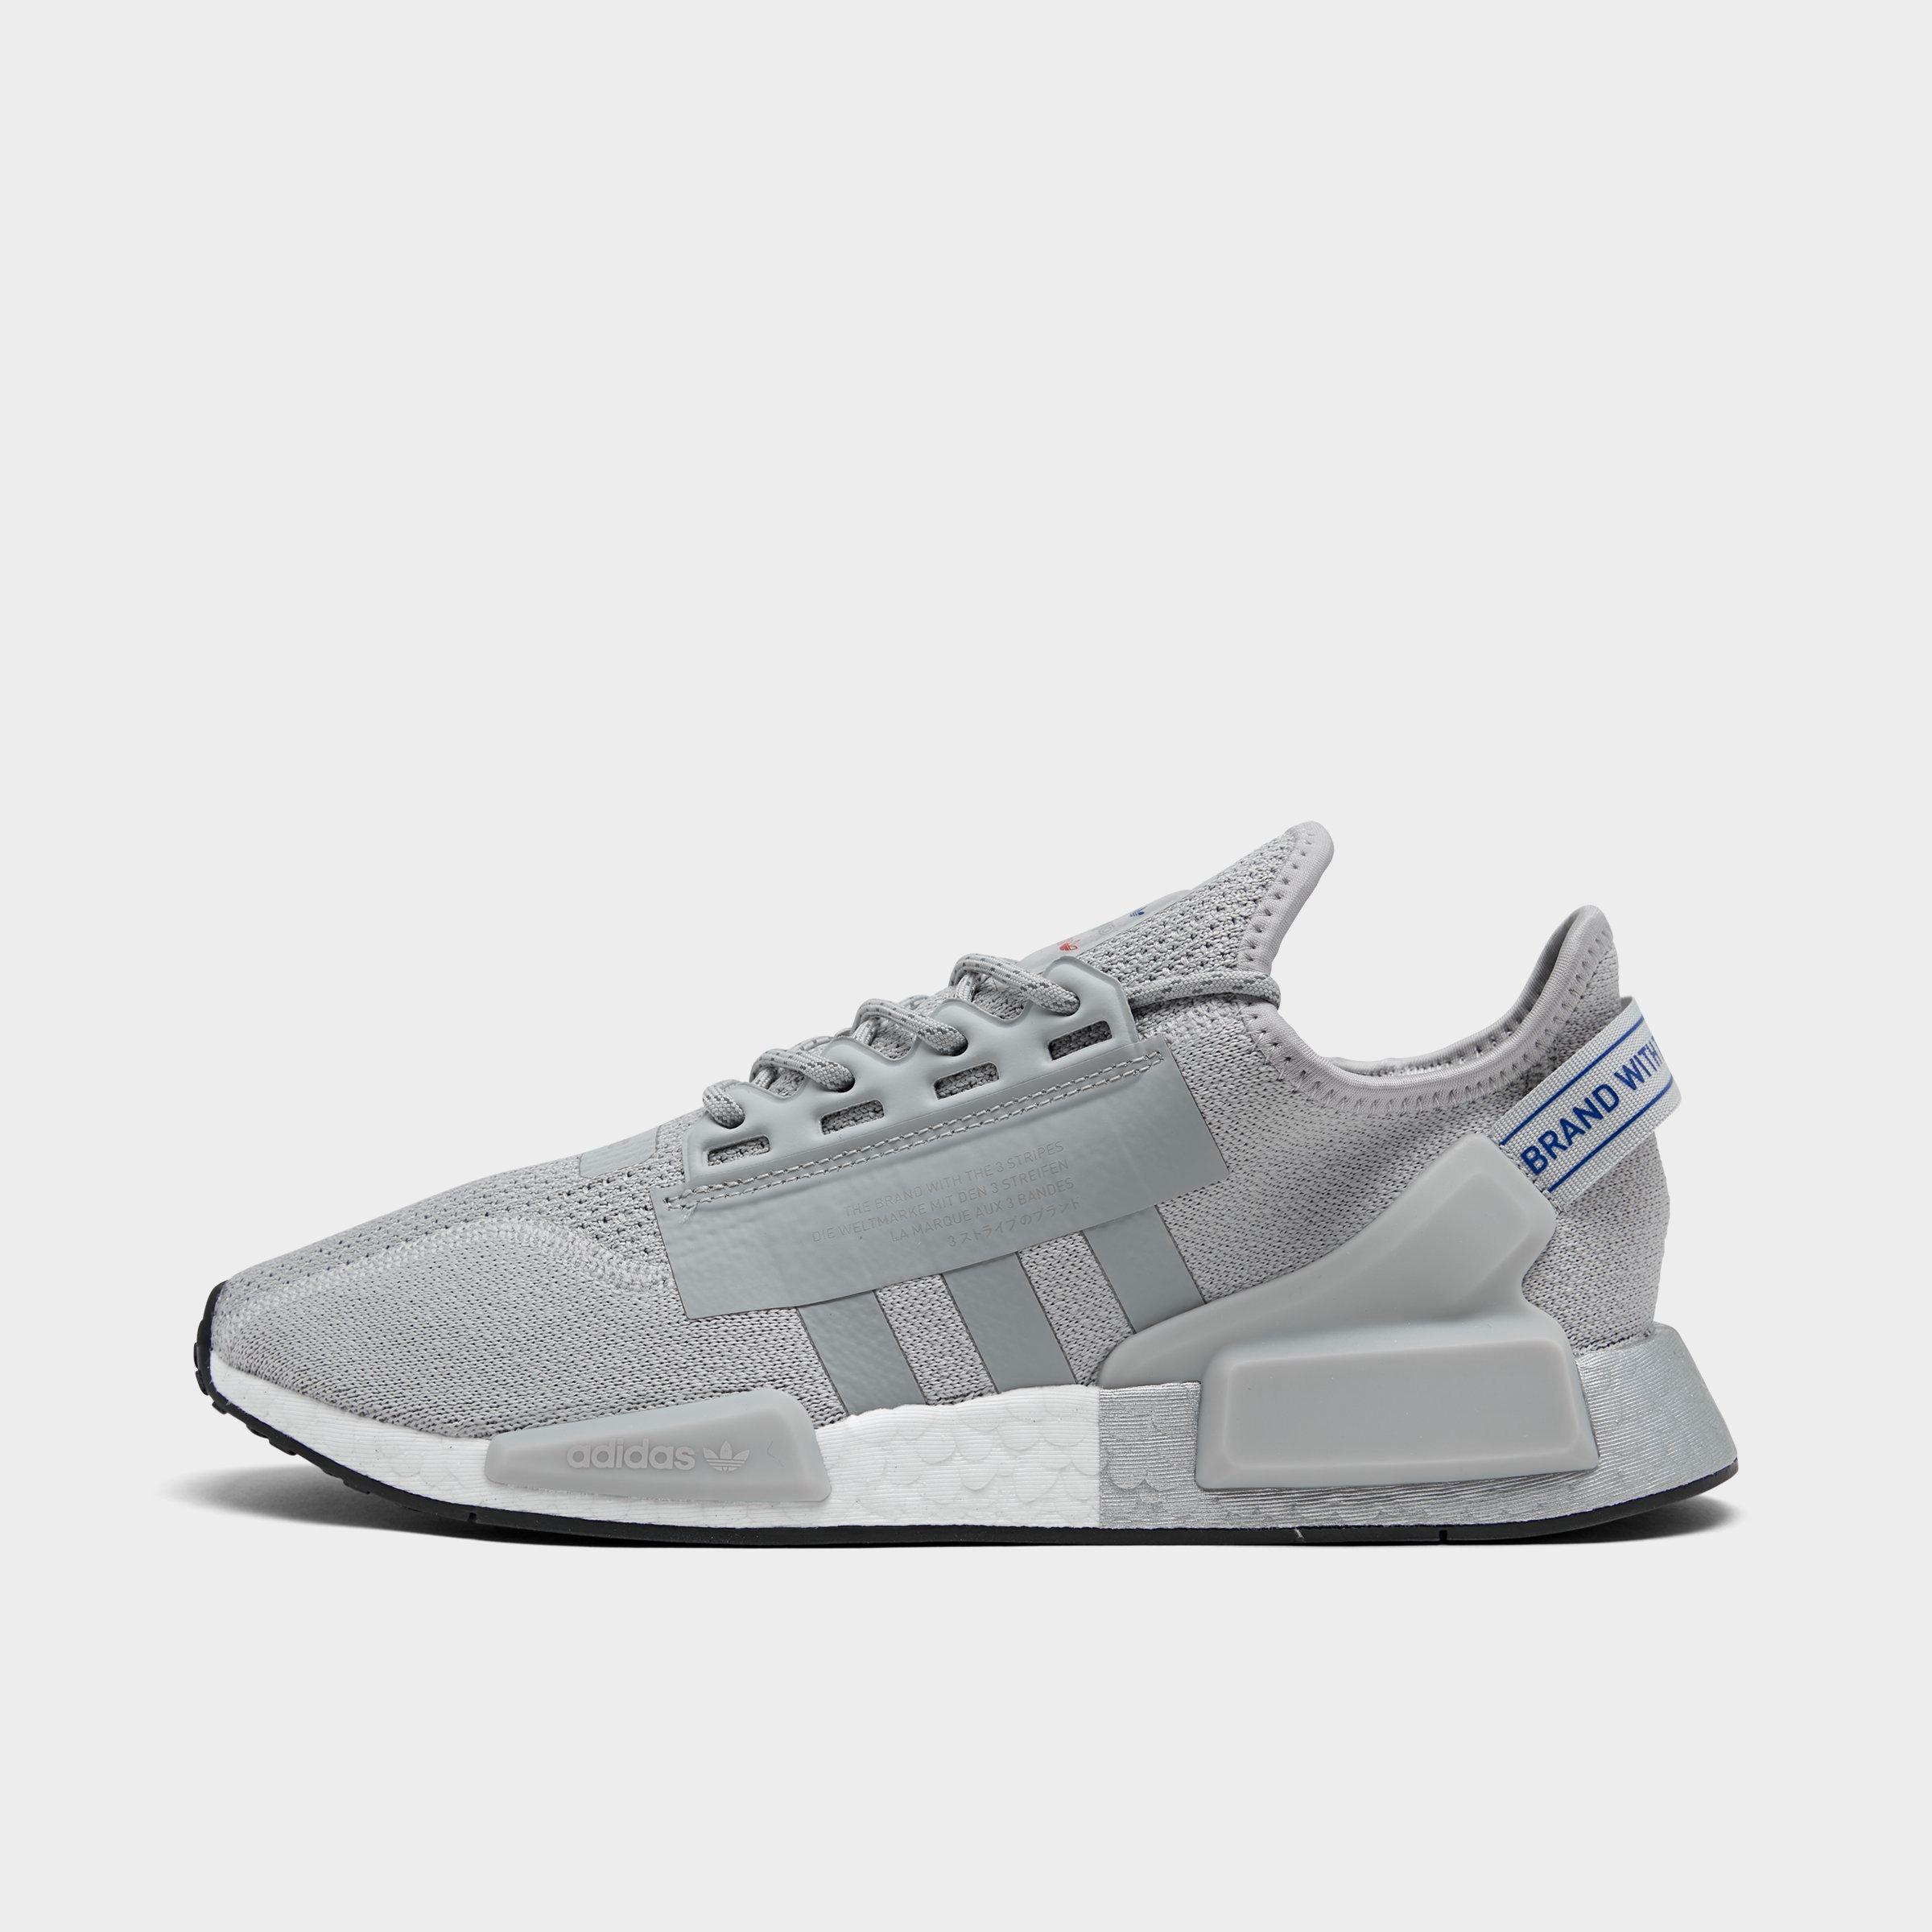 In Stock Adidas Canada NMD R1 Charcoal Wool Gray Mens Adidas